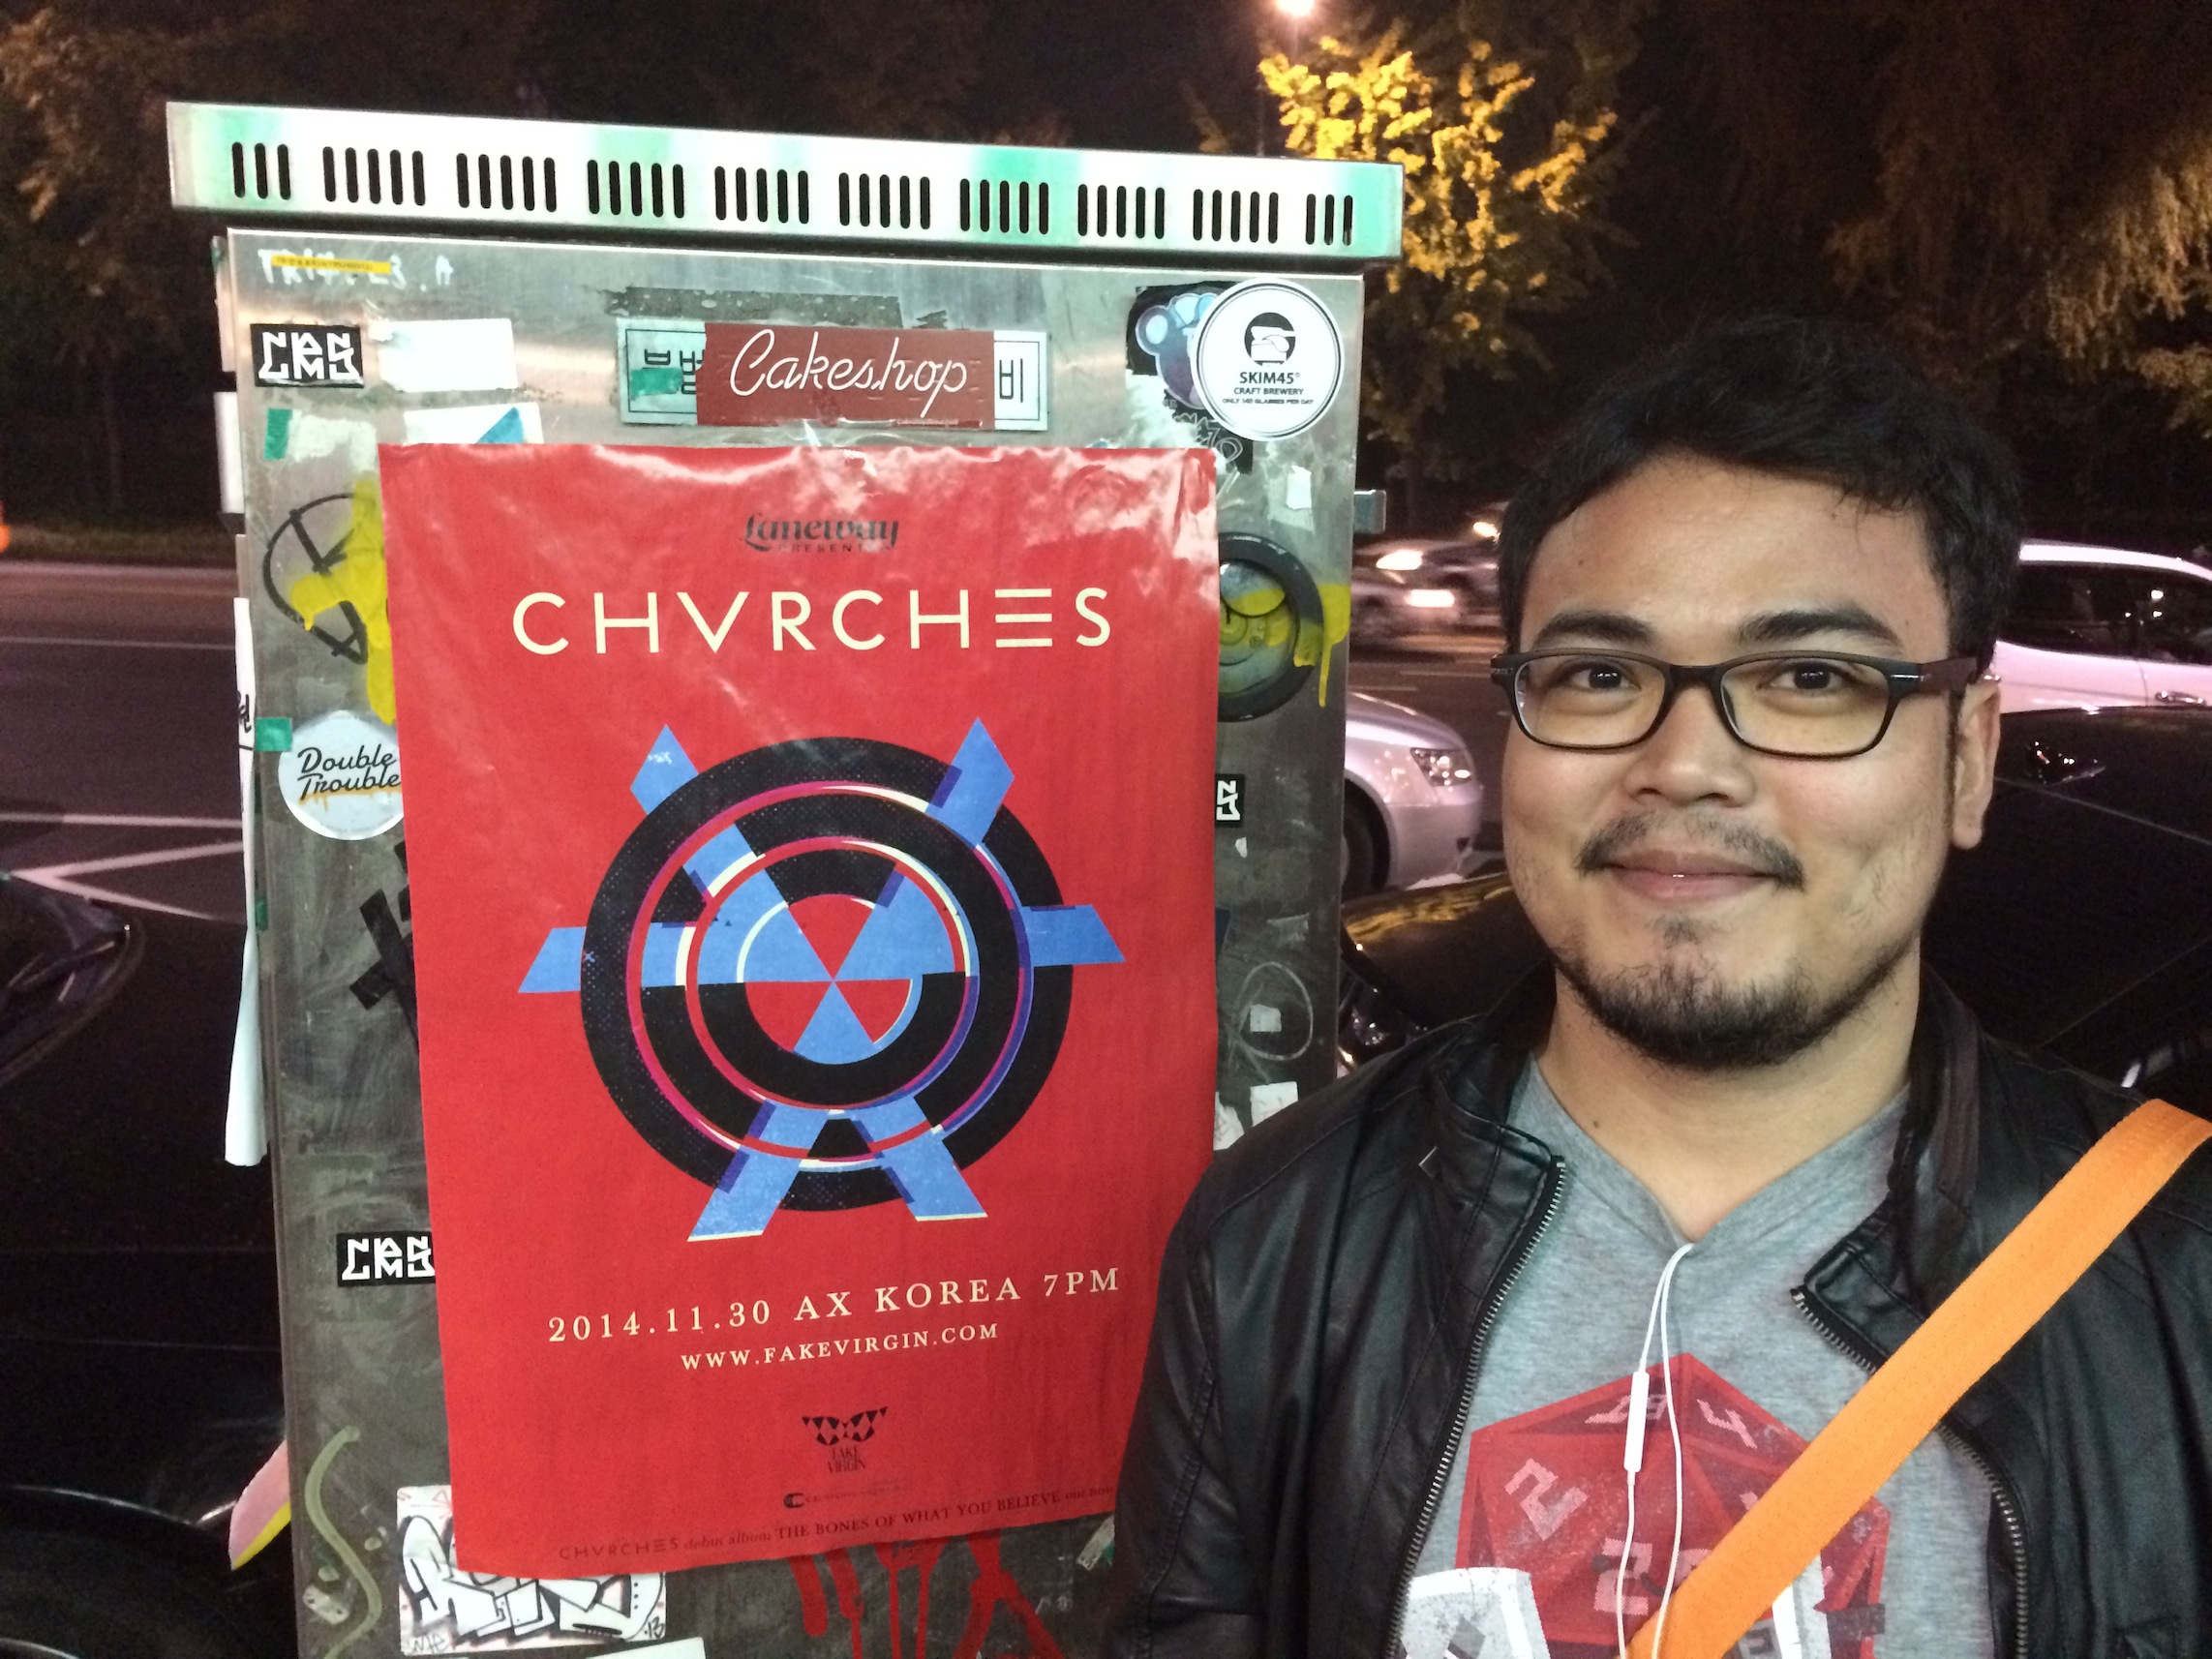 We saw CHVRCHES Asia Tour poster